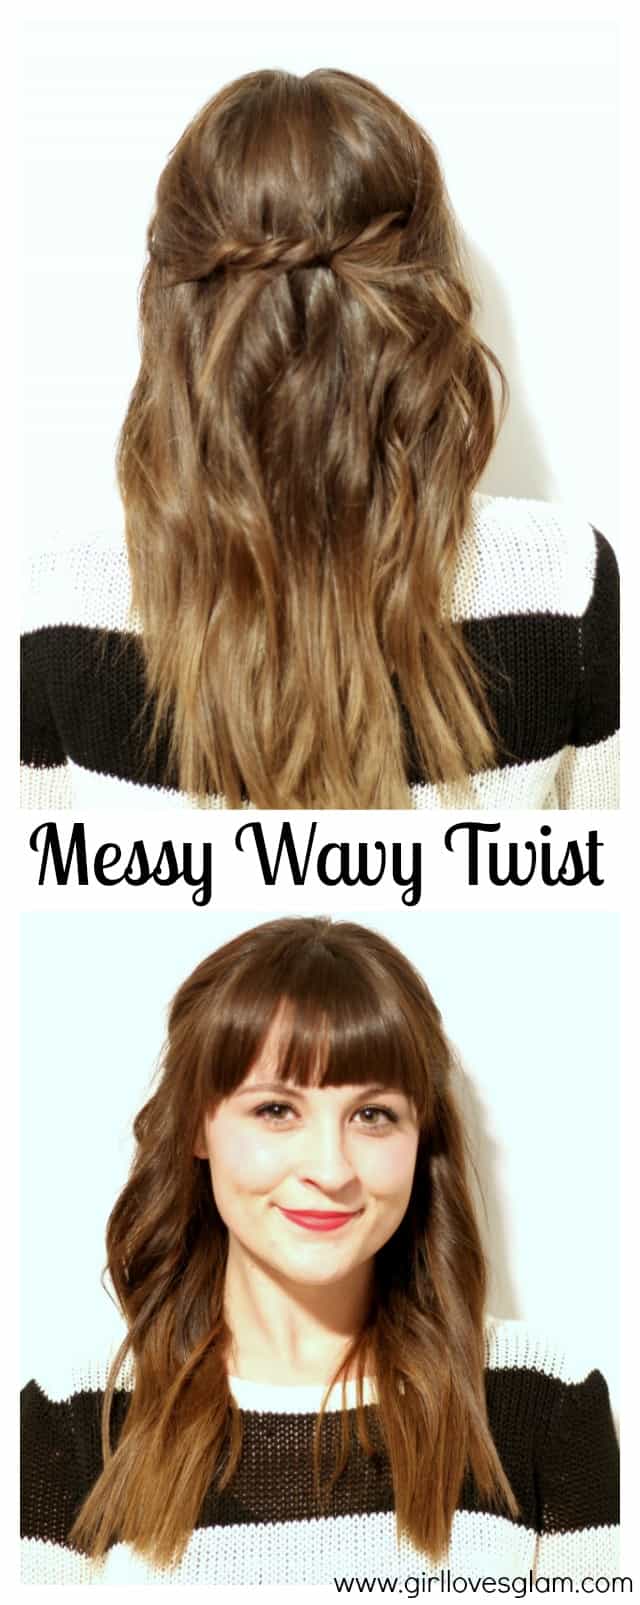 Messy Wavy Twist Hairstyle and Giveaway!